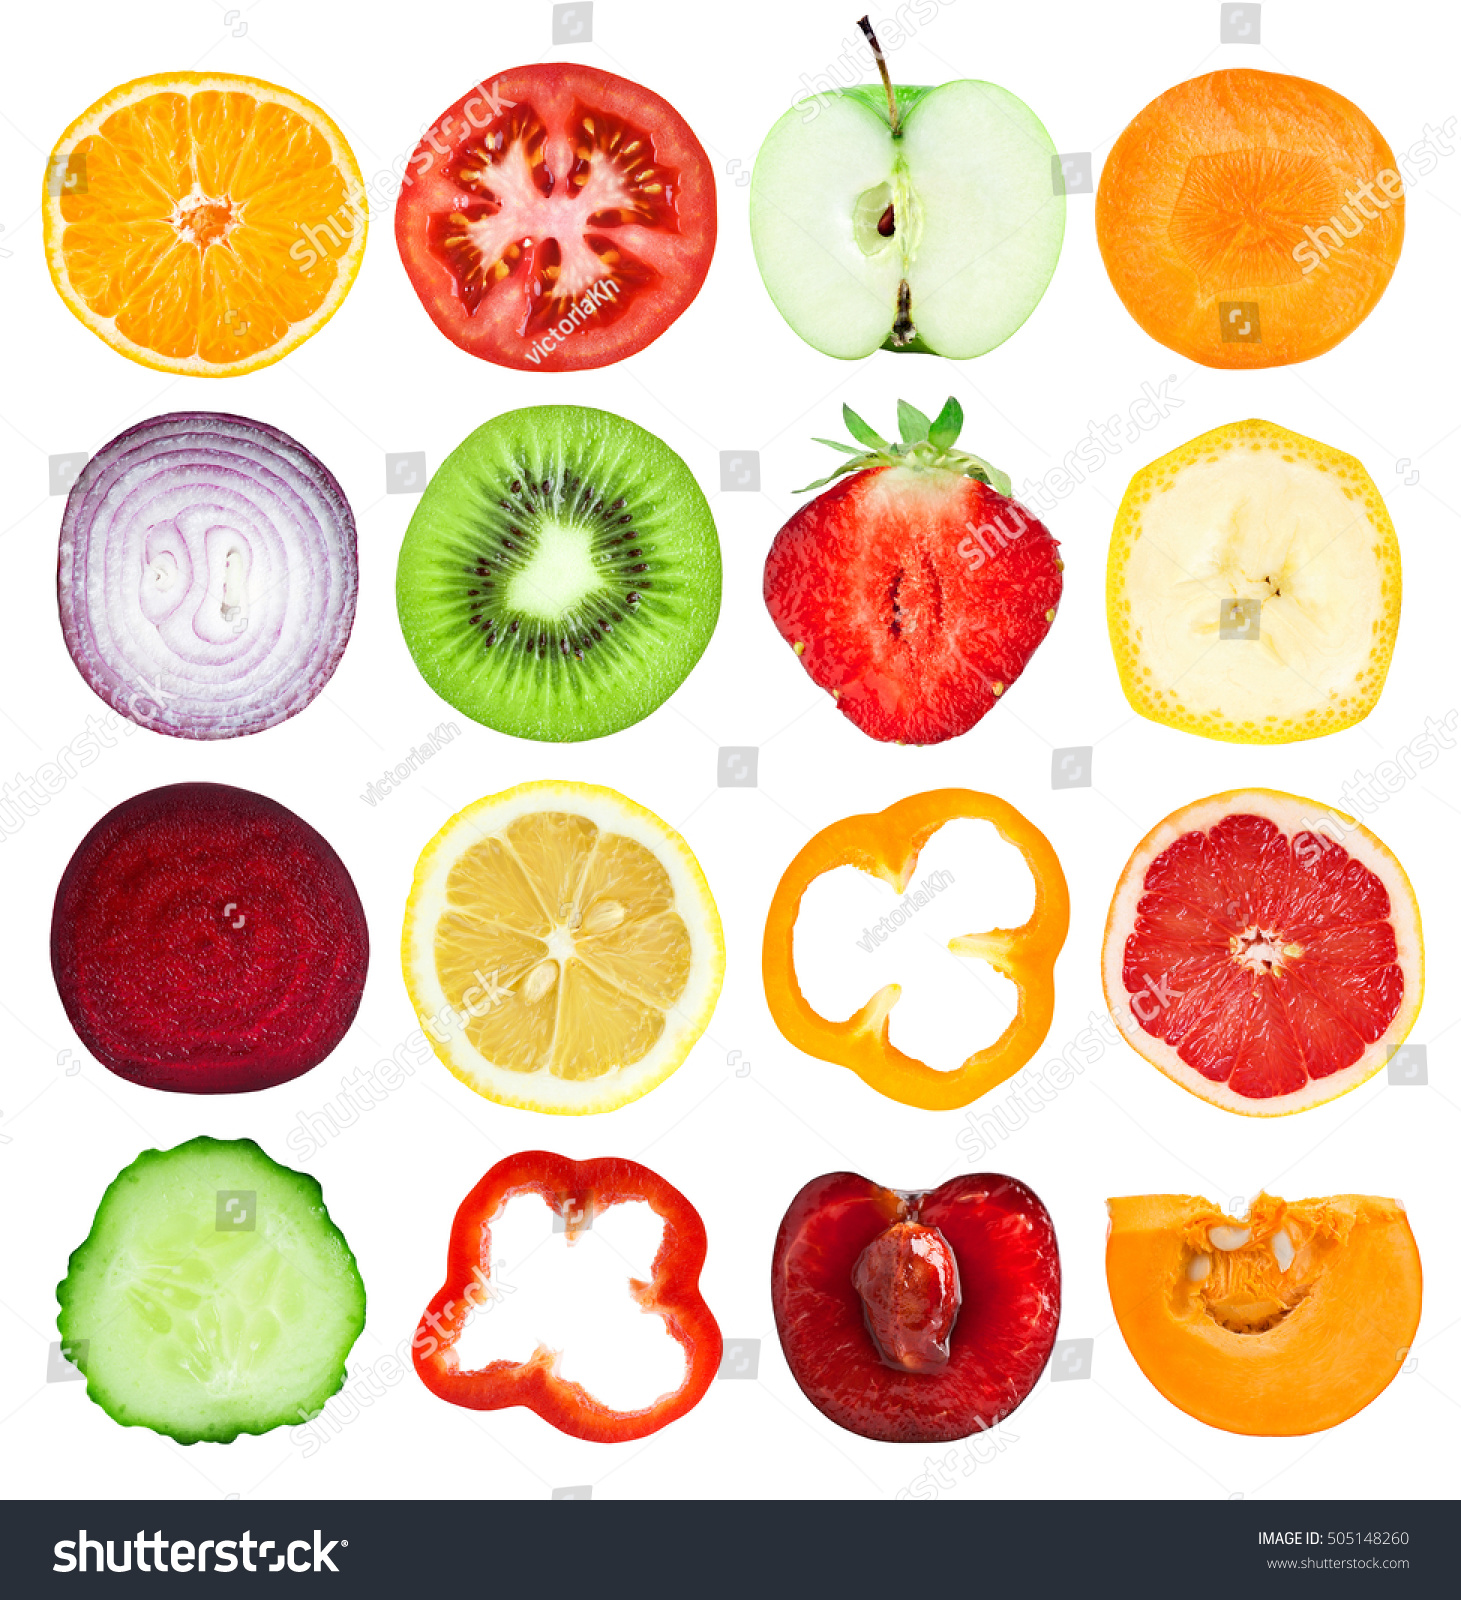 Slices Fruits Vegetables Fresh Food Isolated Stock Photo (Edit Now ...